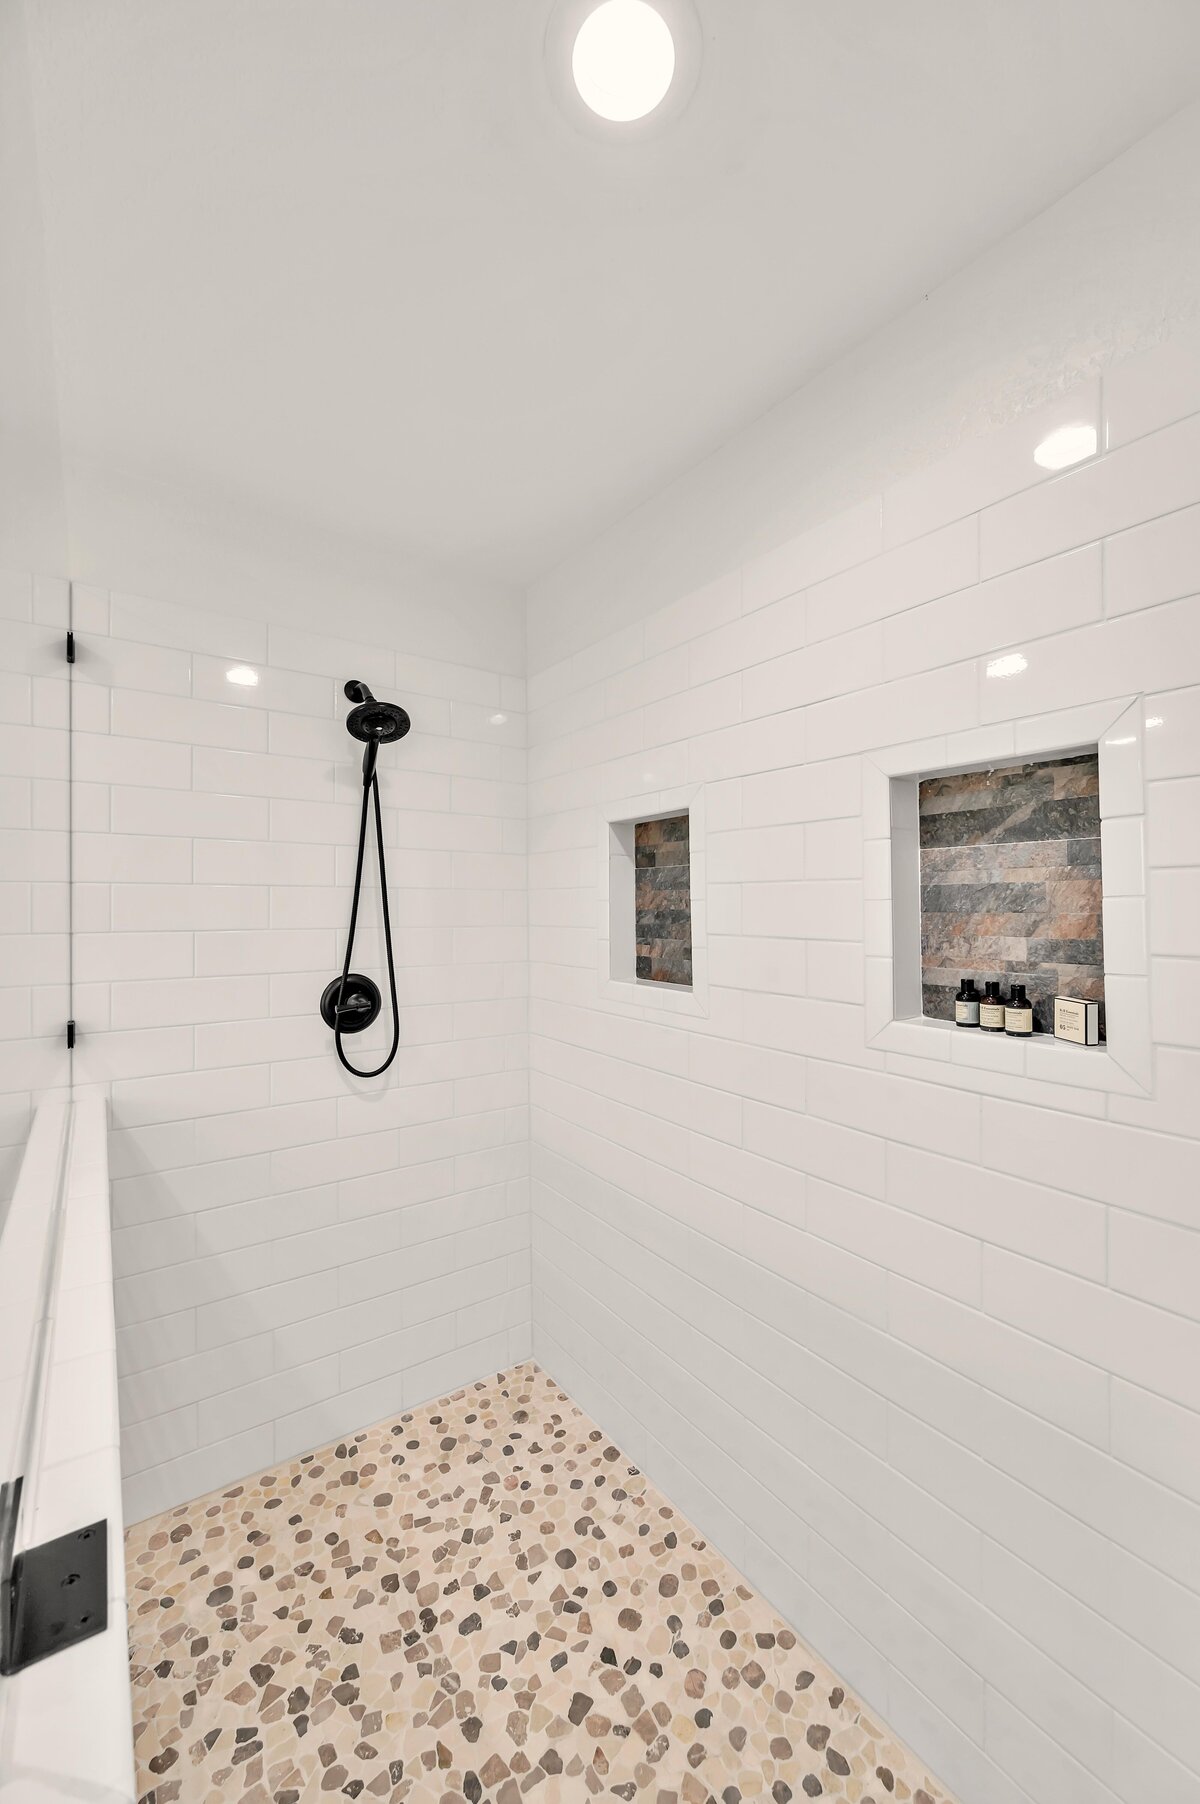 Large walk-in shower in the bathroom of this three-bedroom, two-bathroom vacation rental house with free Wifi, fully equipped kitchen, office space, and room for six in downtown Waco, TX.